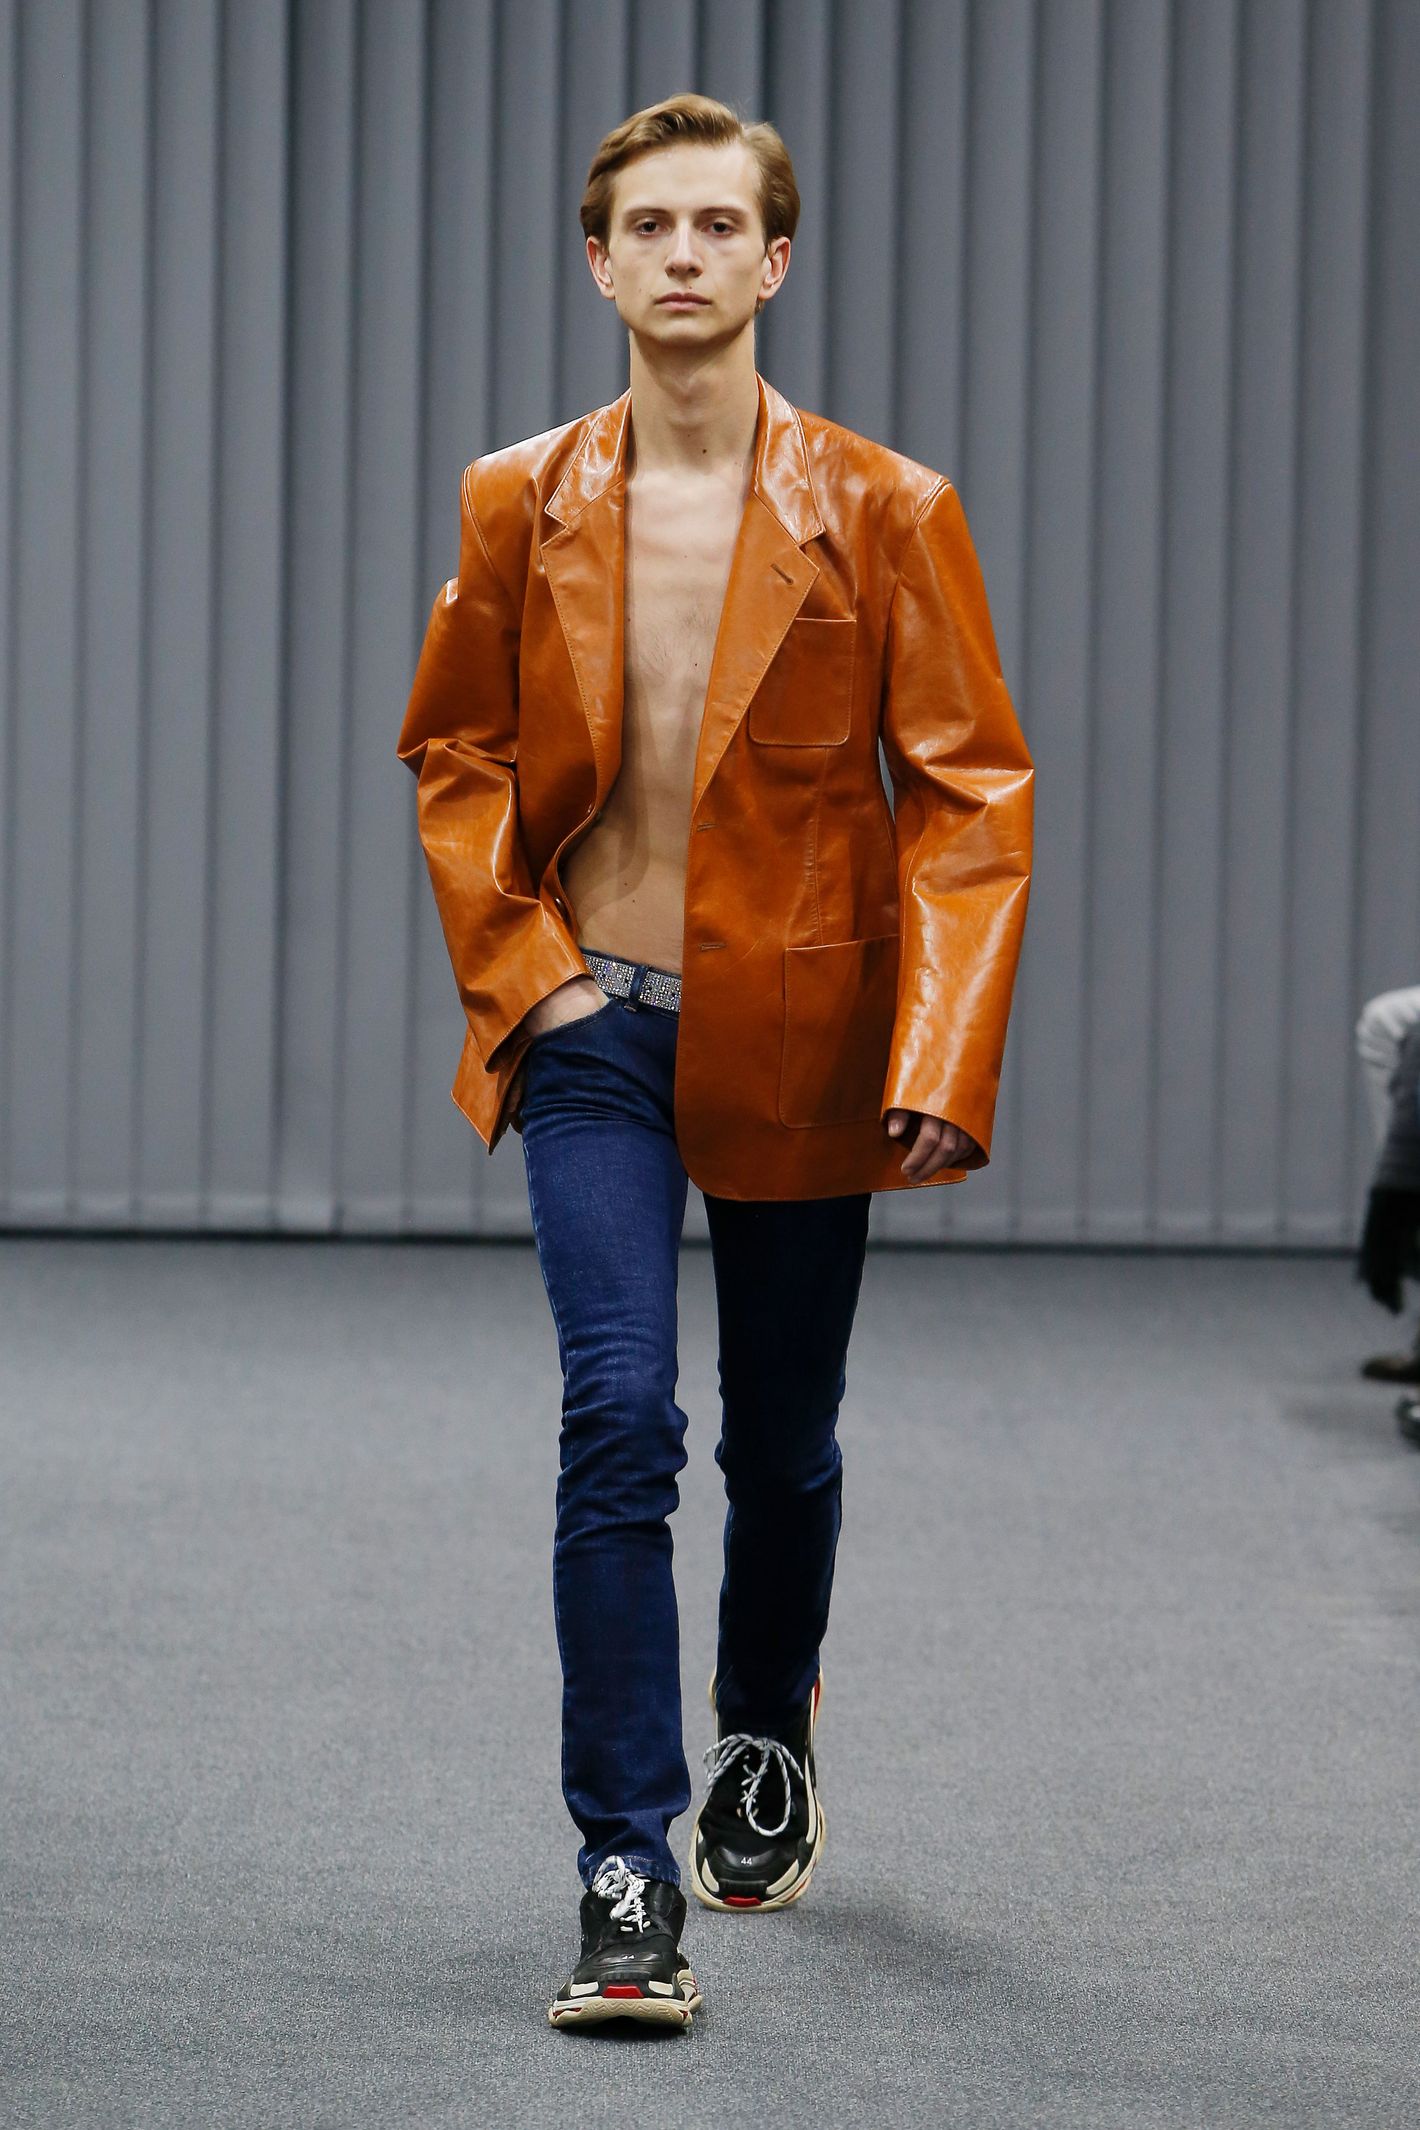 Demna Gvasalias First Mens Collection for Balenciaga Includes Huge  Shoulders Perfect Heels  Racked